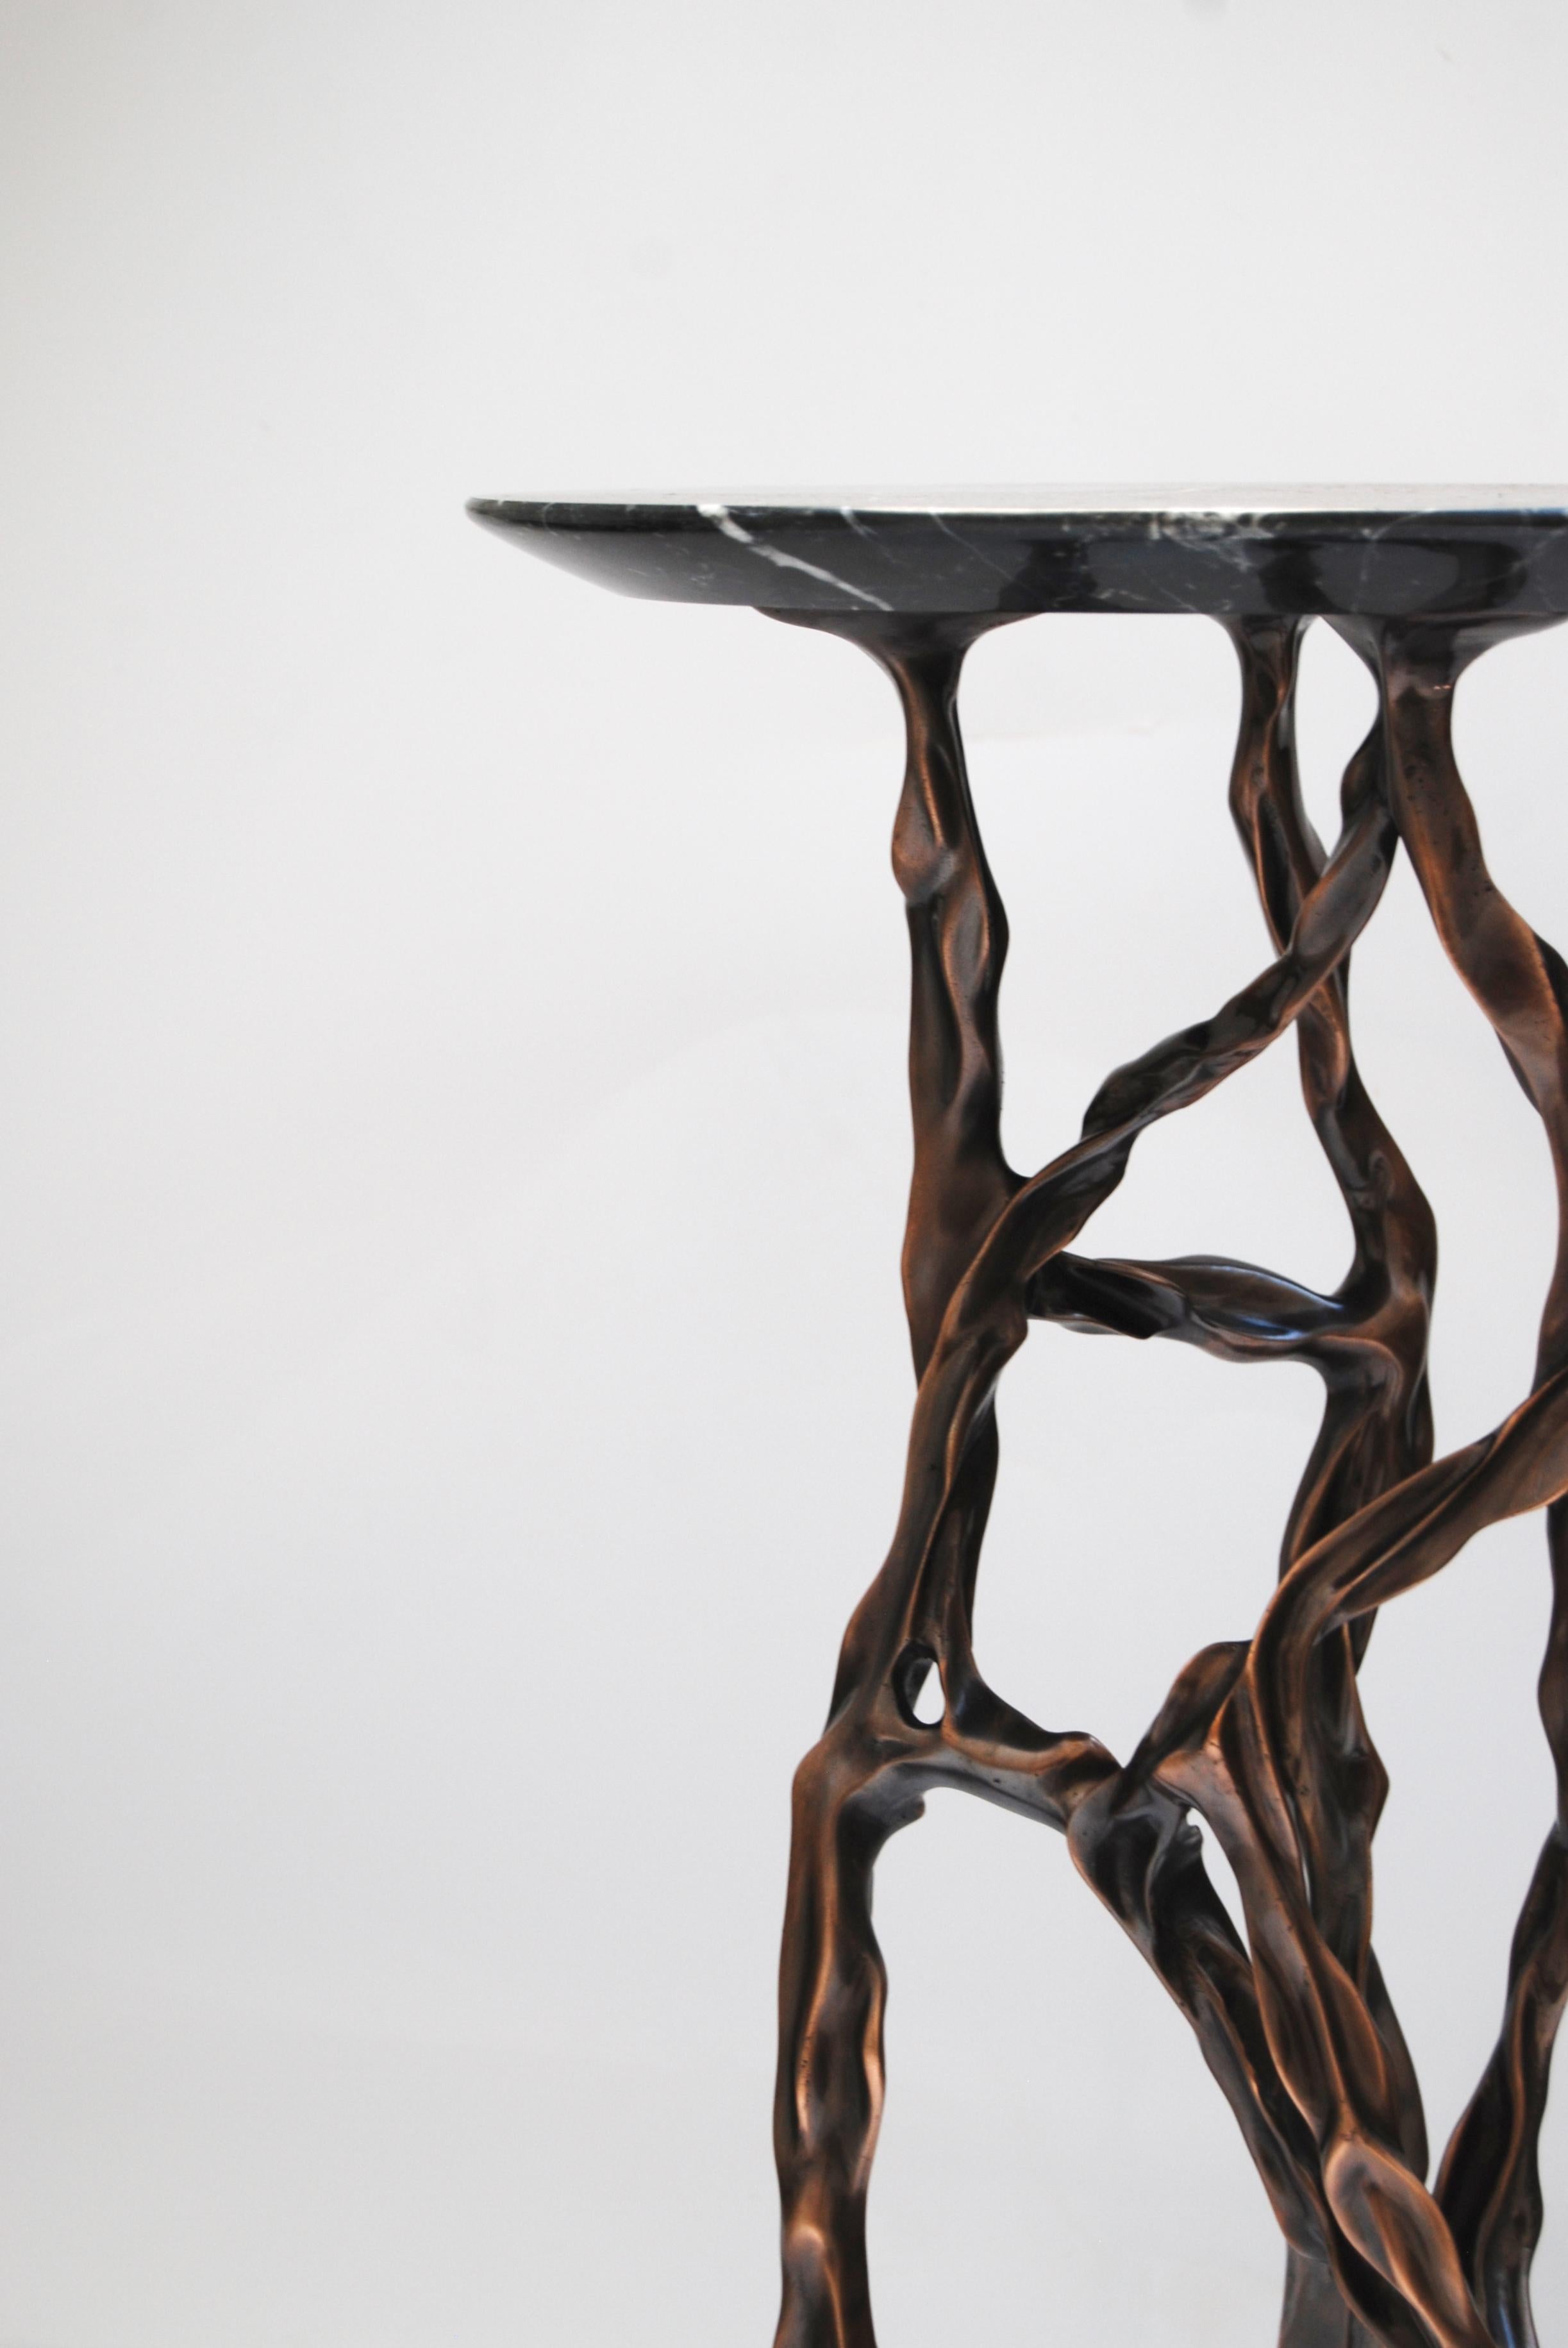 Pair of dark bronze side tables with Marquina marble top by Fakasaka Design
Dimensions: W 28 x D 28 x H 62 cm
Materials: Dark bronze, Nero Marquina marble.

